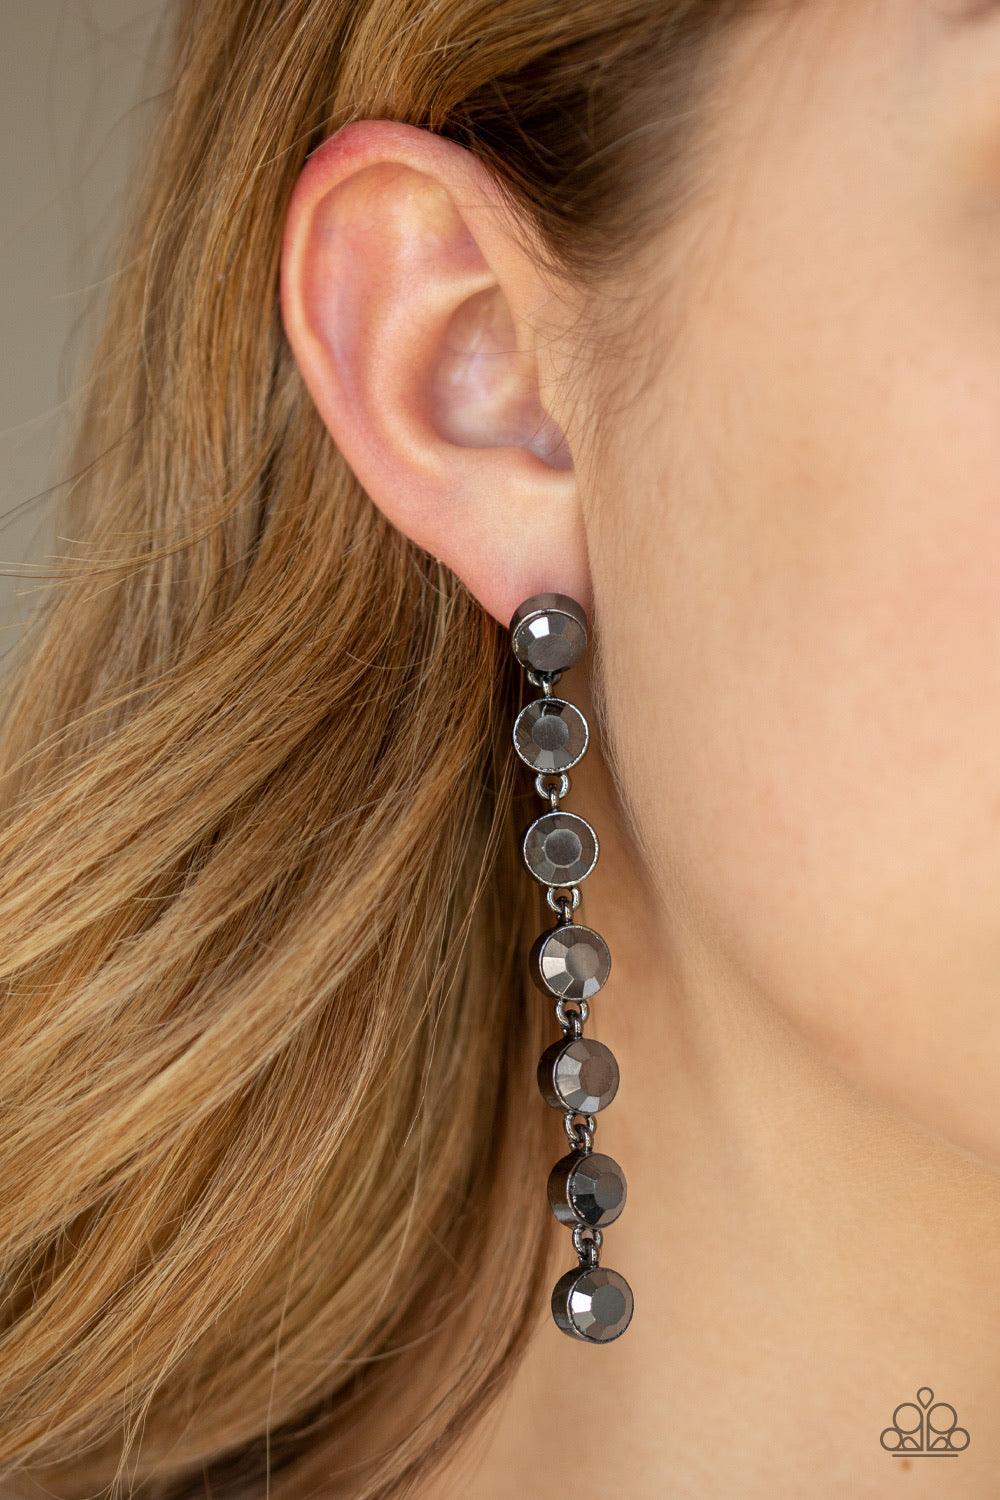 Paparazzi Accessories Dazzling Debonair - Black Featuring sleek gunmetal fittings, a collection of oversized hematite rhinestones drip from the ear for a glamorous look. Earring attaches to a standard post fitting. Jewelry